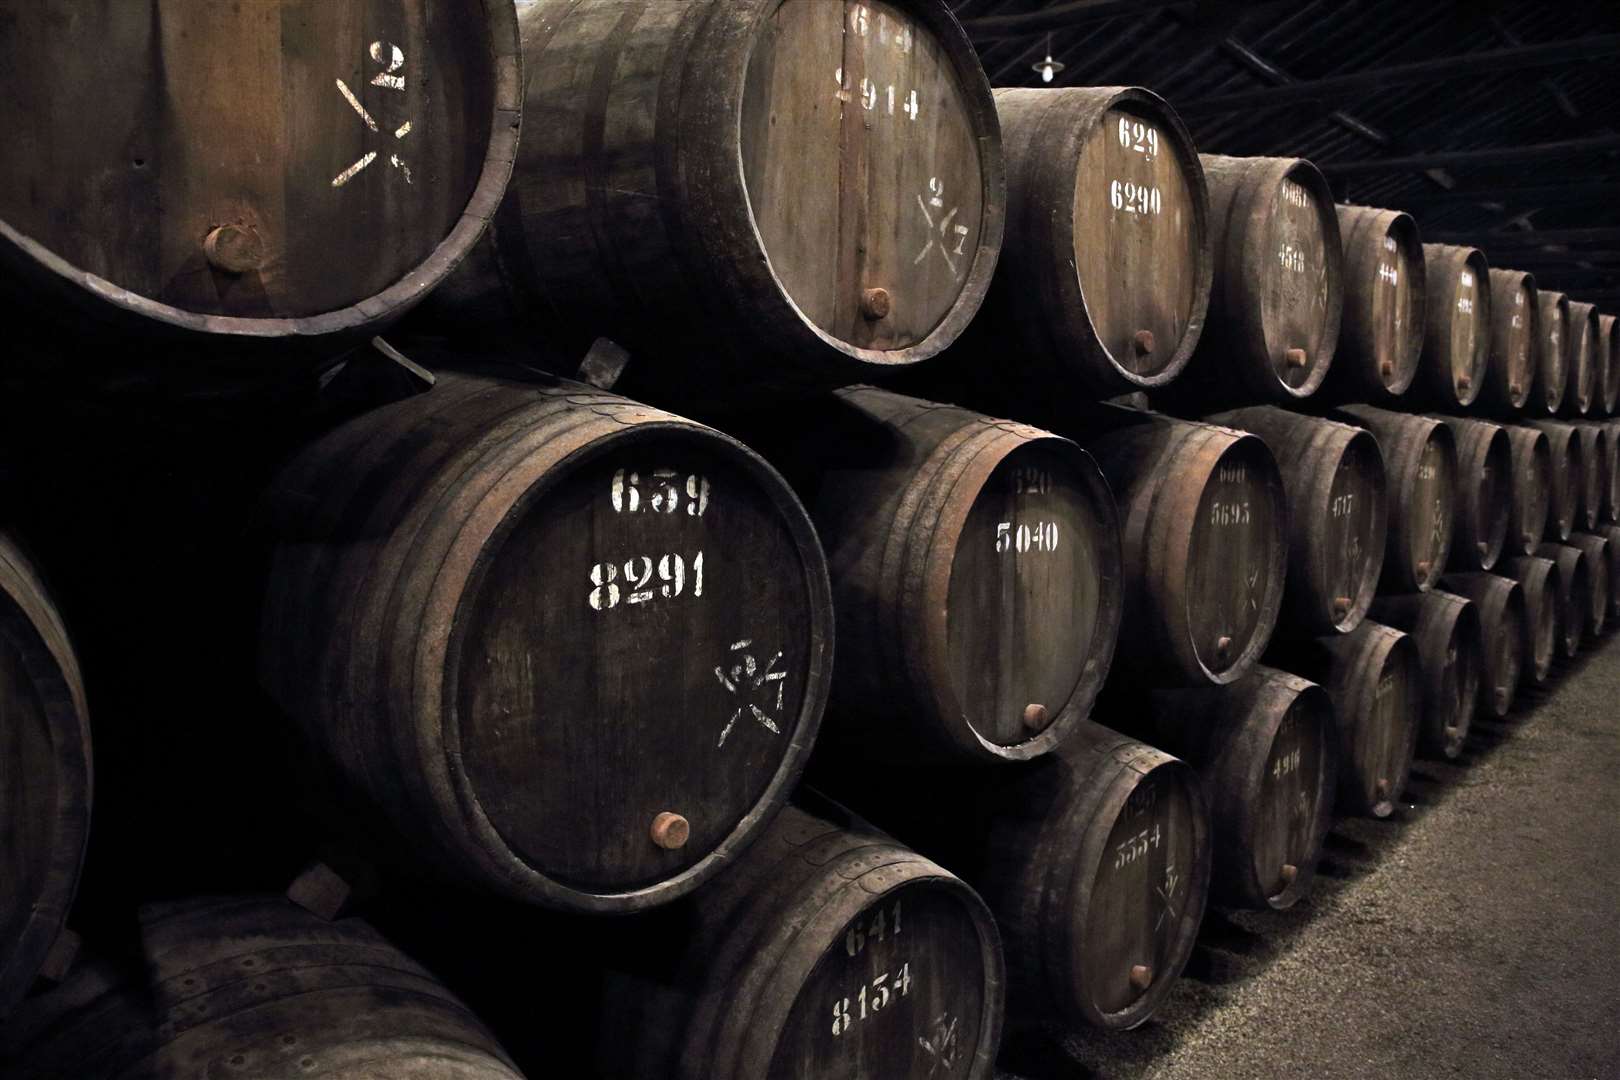 Wine and sherry often use animal products to filter their drinks, and these casks can then be used to age the whisky.